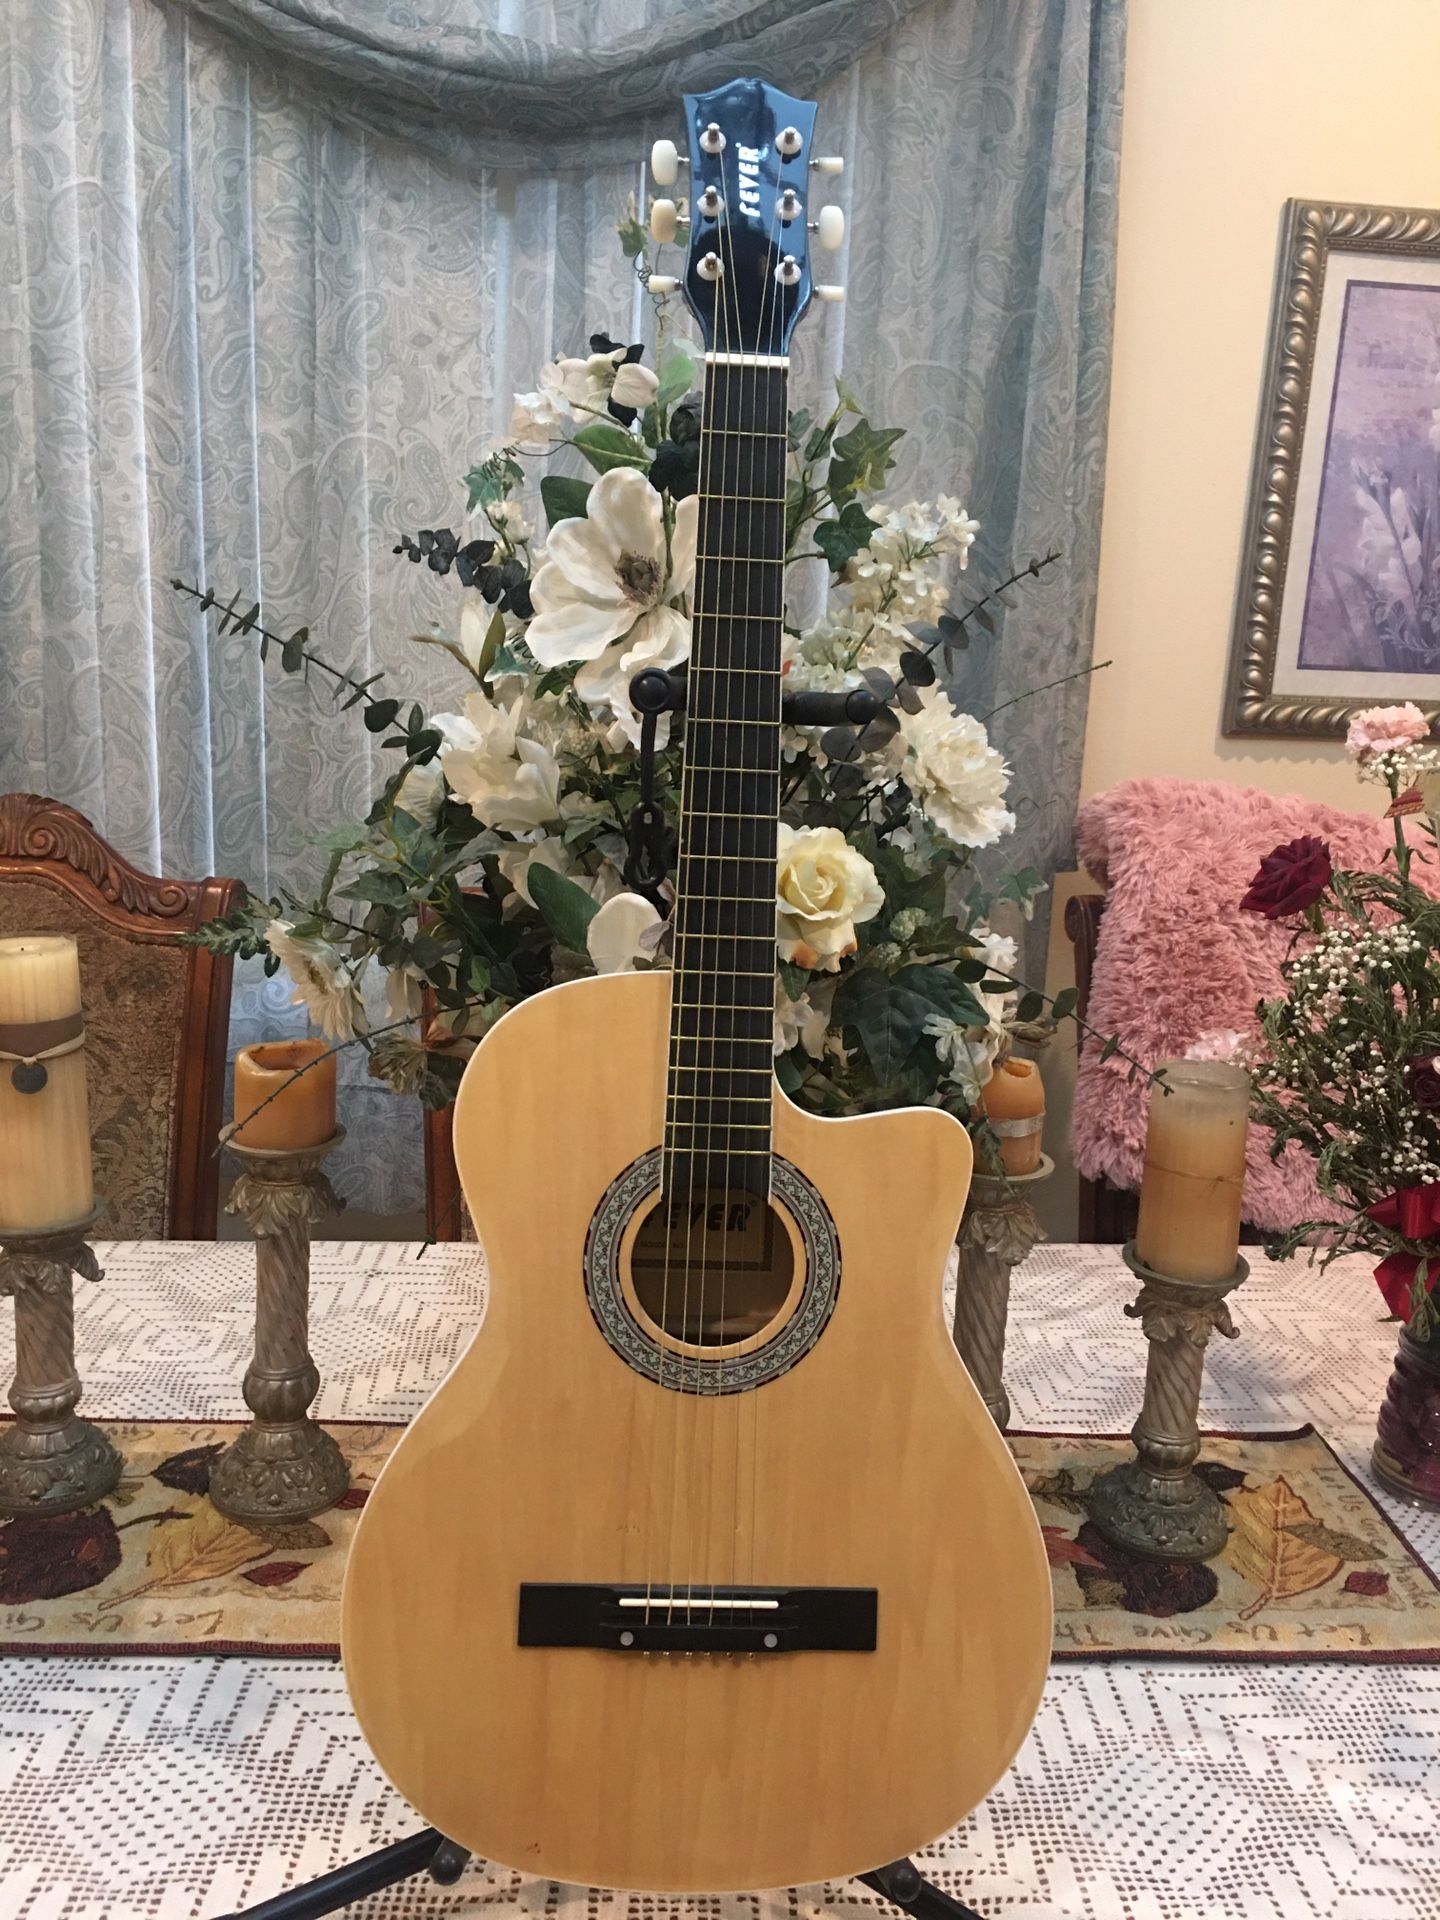 Fever acoustic guitar 38 inches length